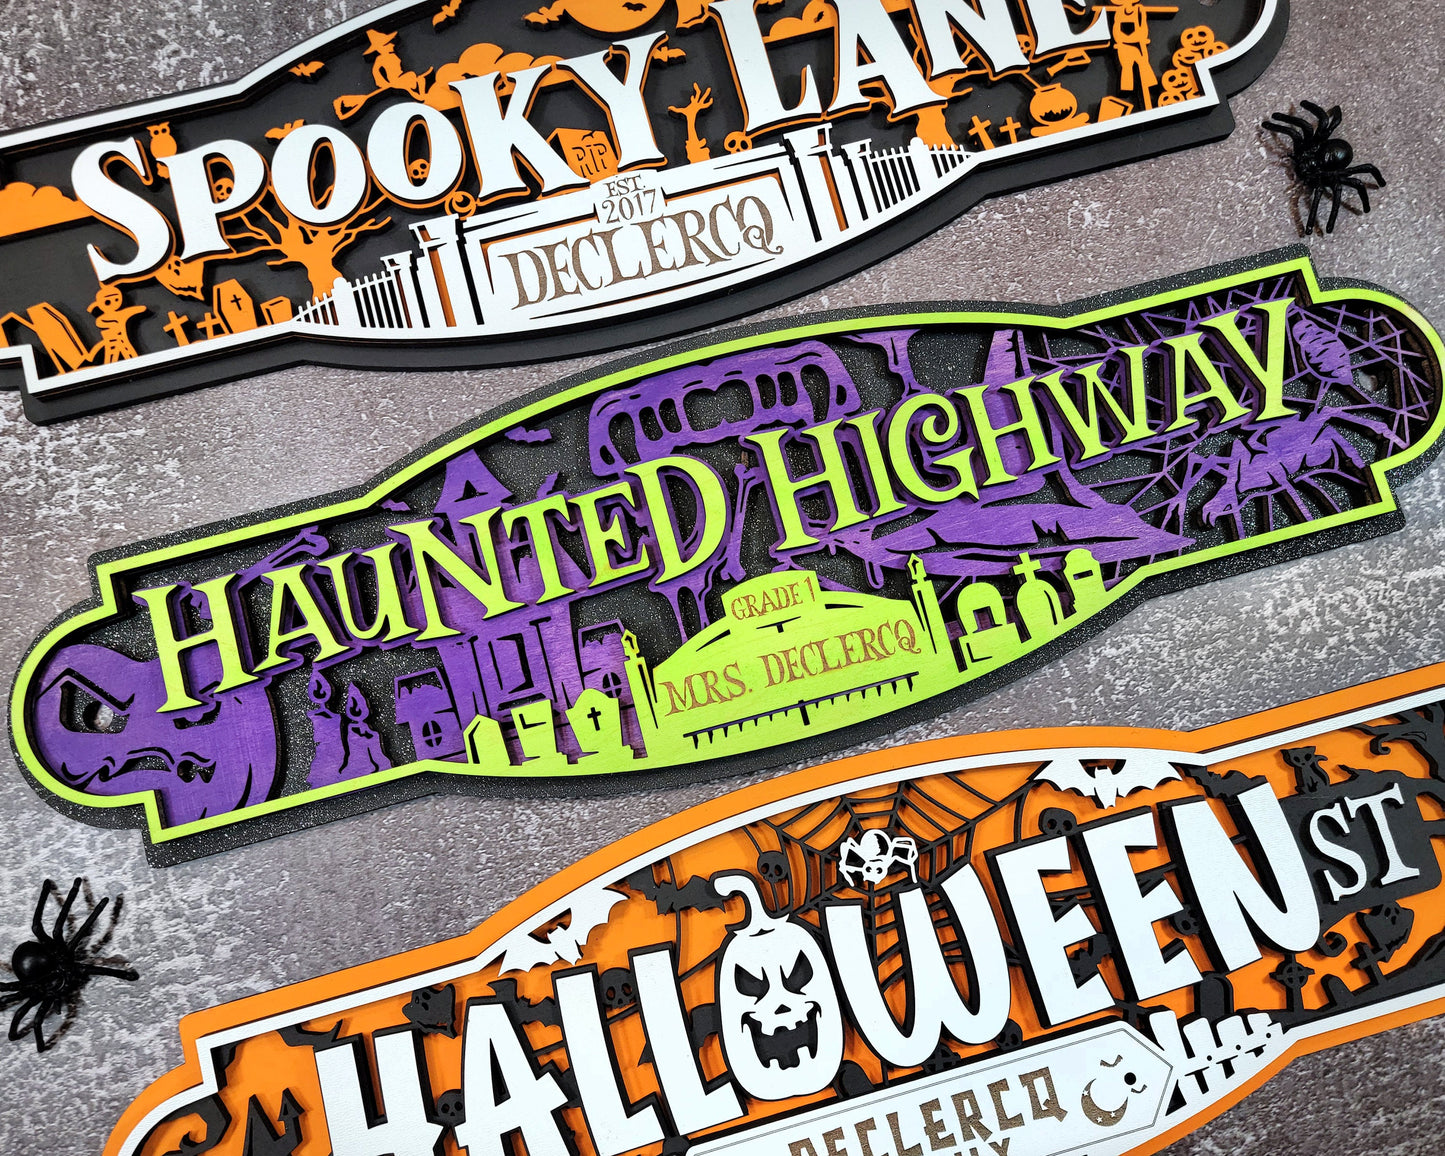 Spooktacular Halloween Street Signs - 3 Street Signs Designs Included - SVG File Download - Sized & Tested in Glowforge